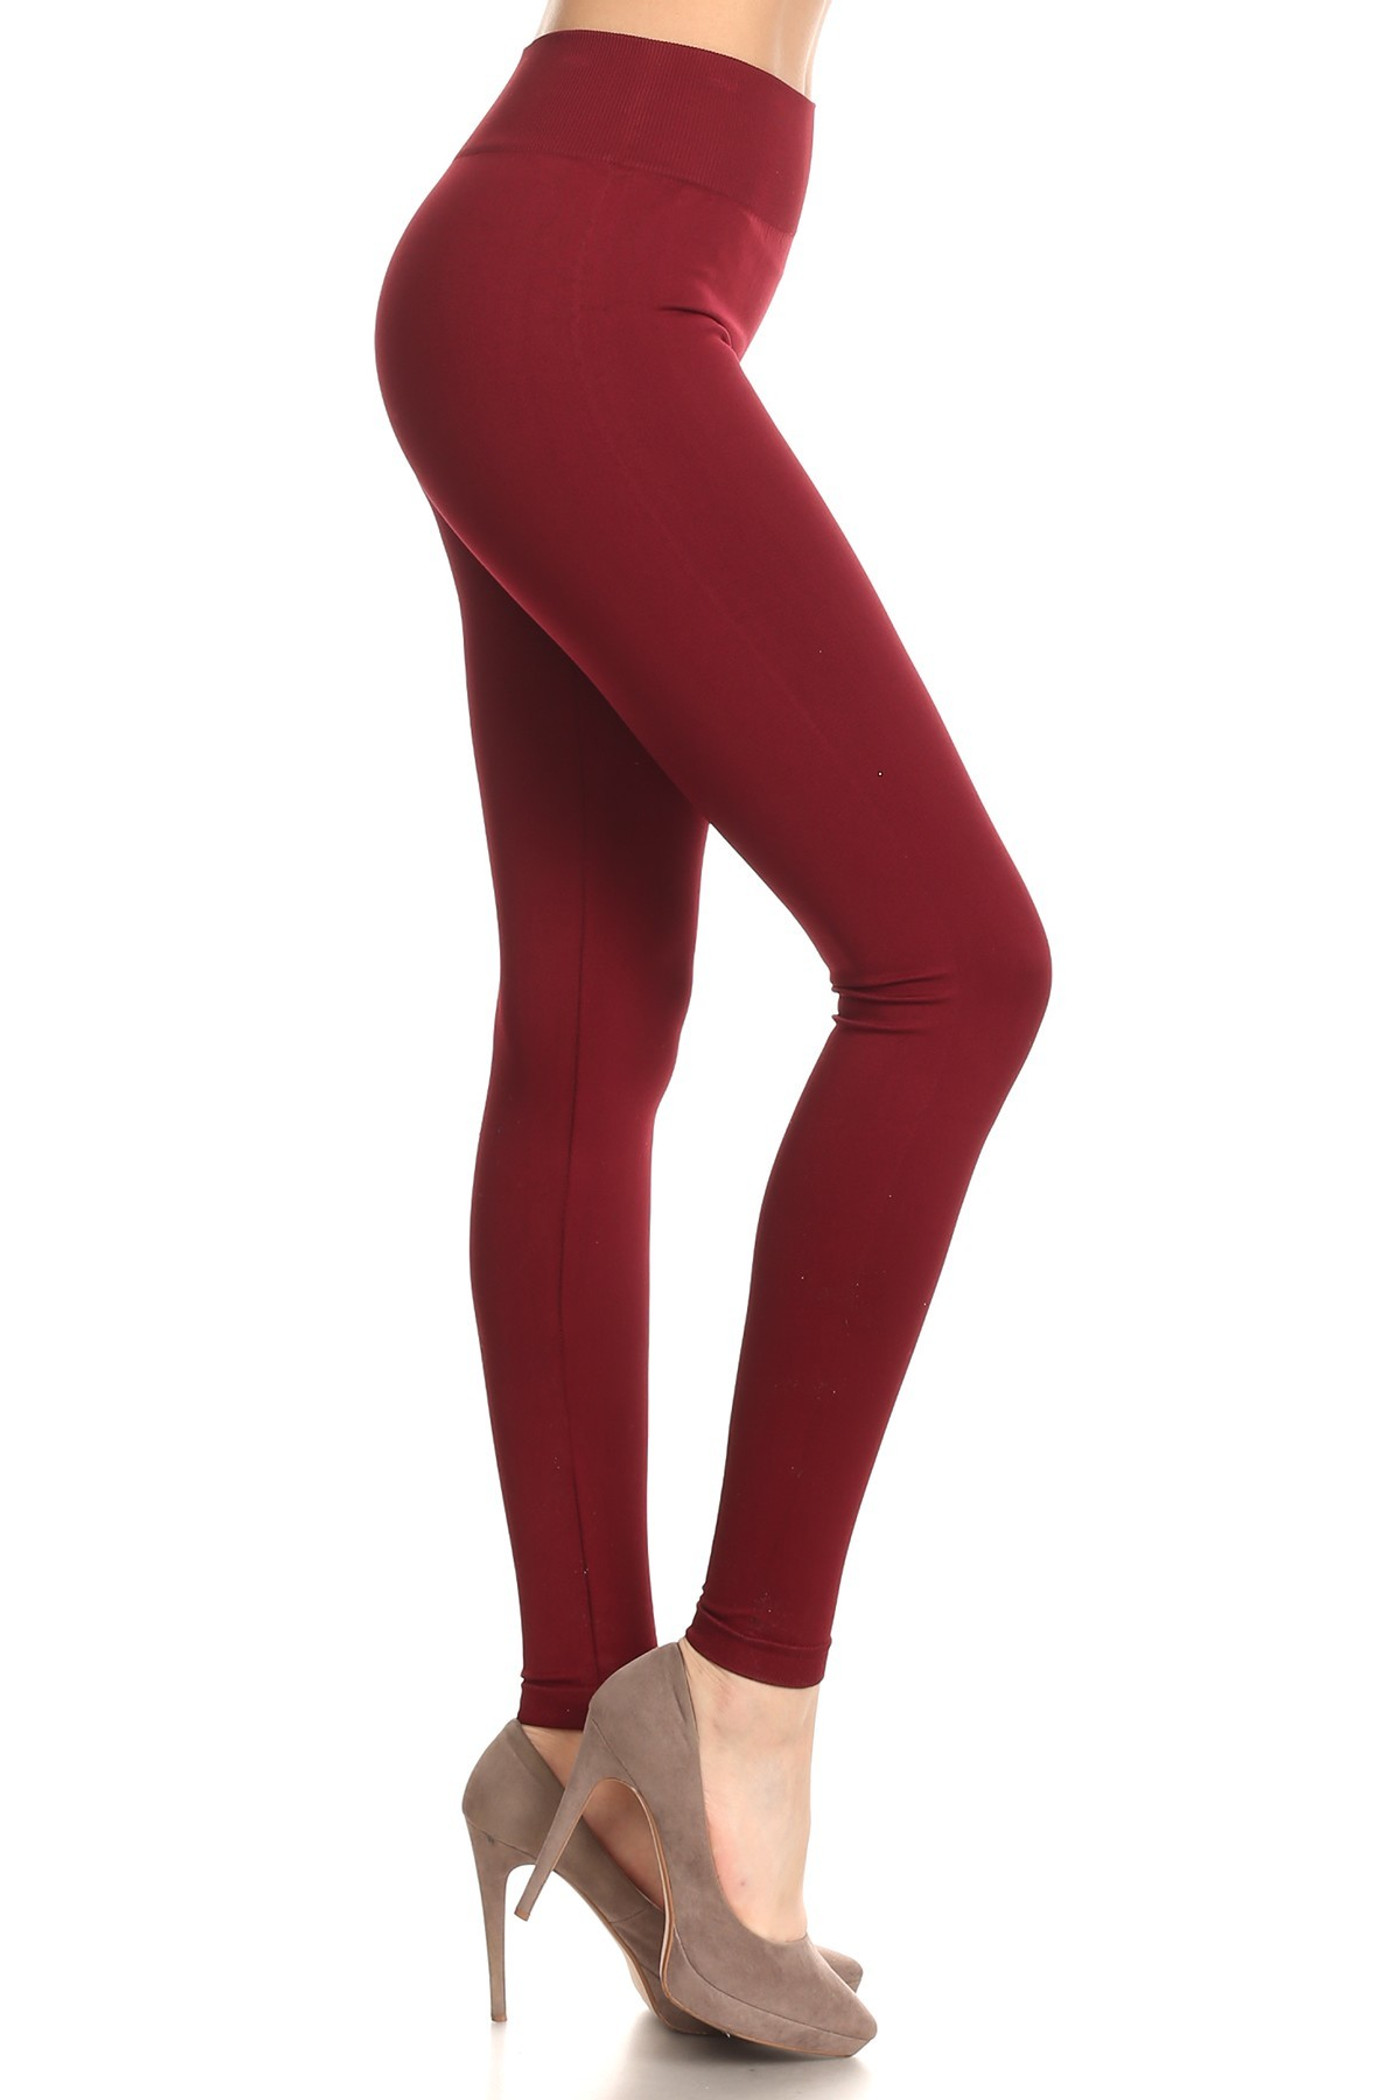 Buttery Smooth Basic Solid Extra Plus Size Leggings - 3X-5X - USA